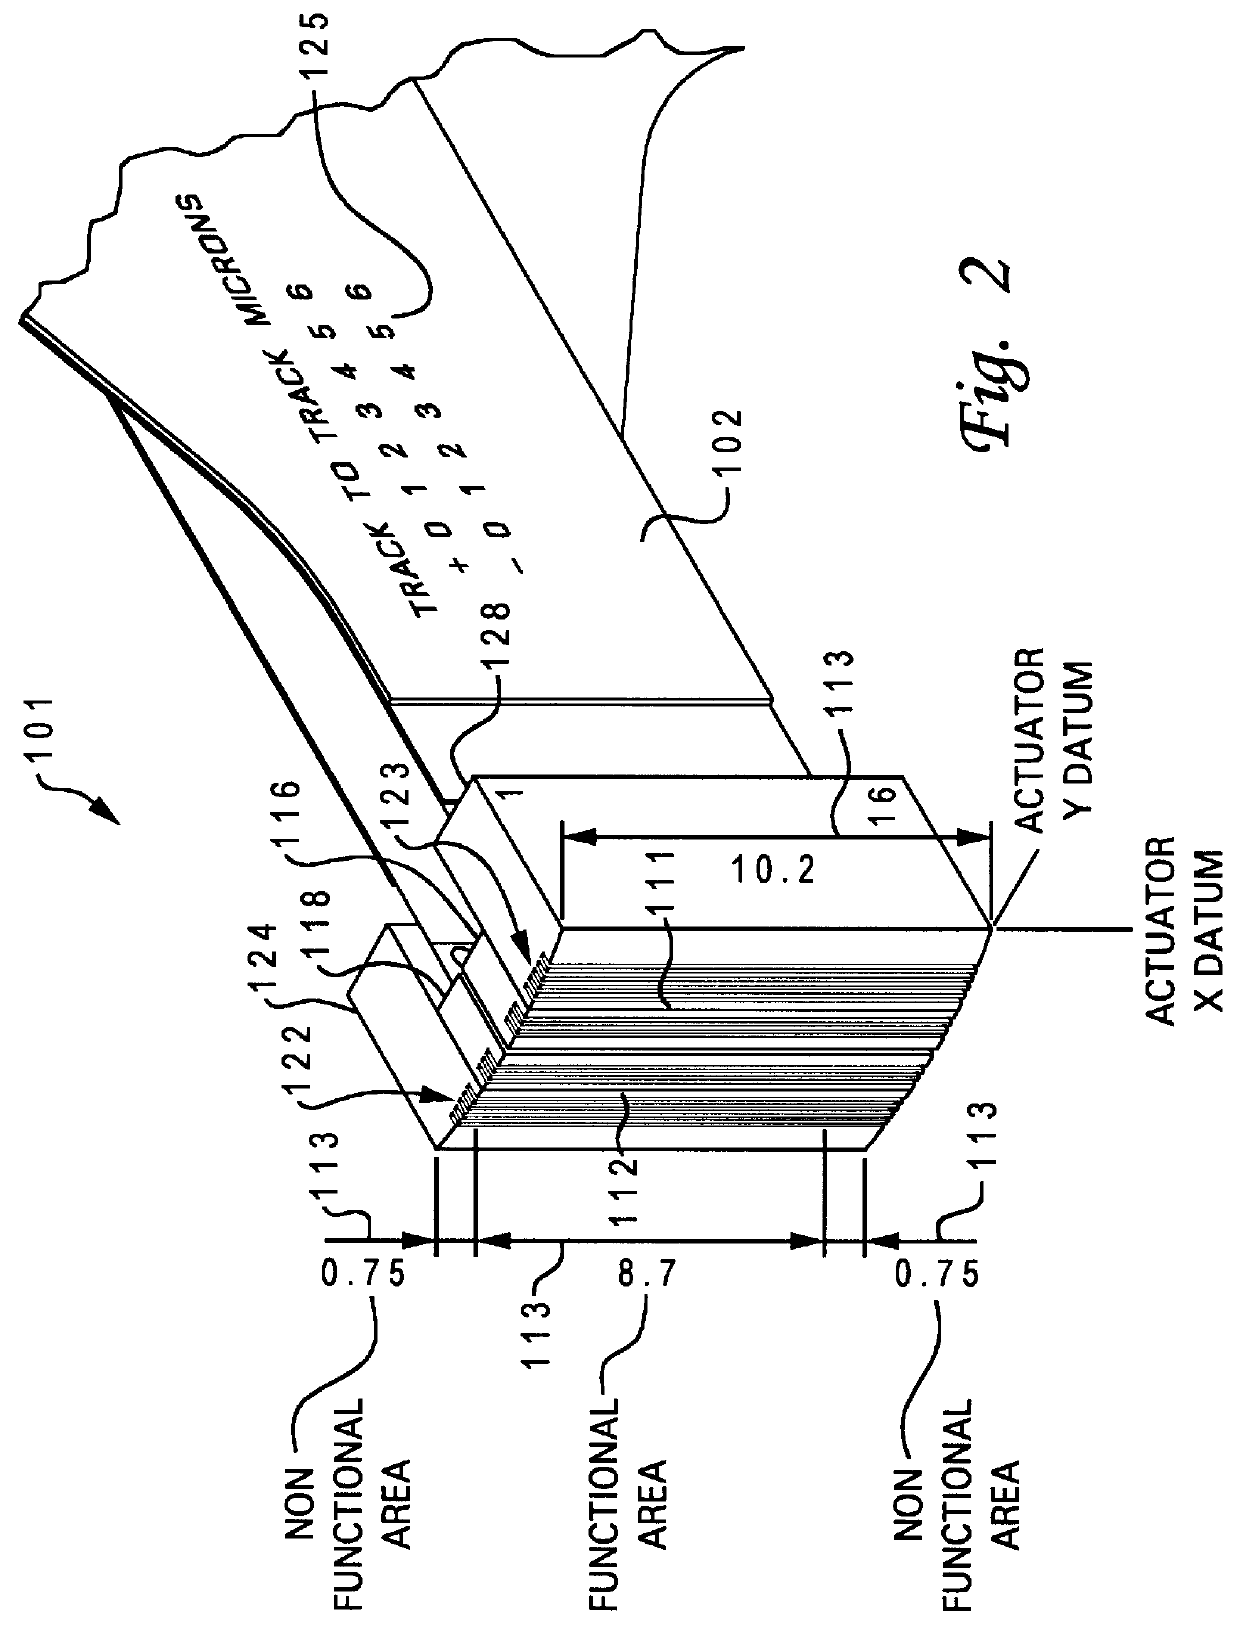 Apparatus and method for the control and positioning of magnetic recording heads in an azimuth recording system